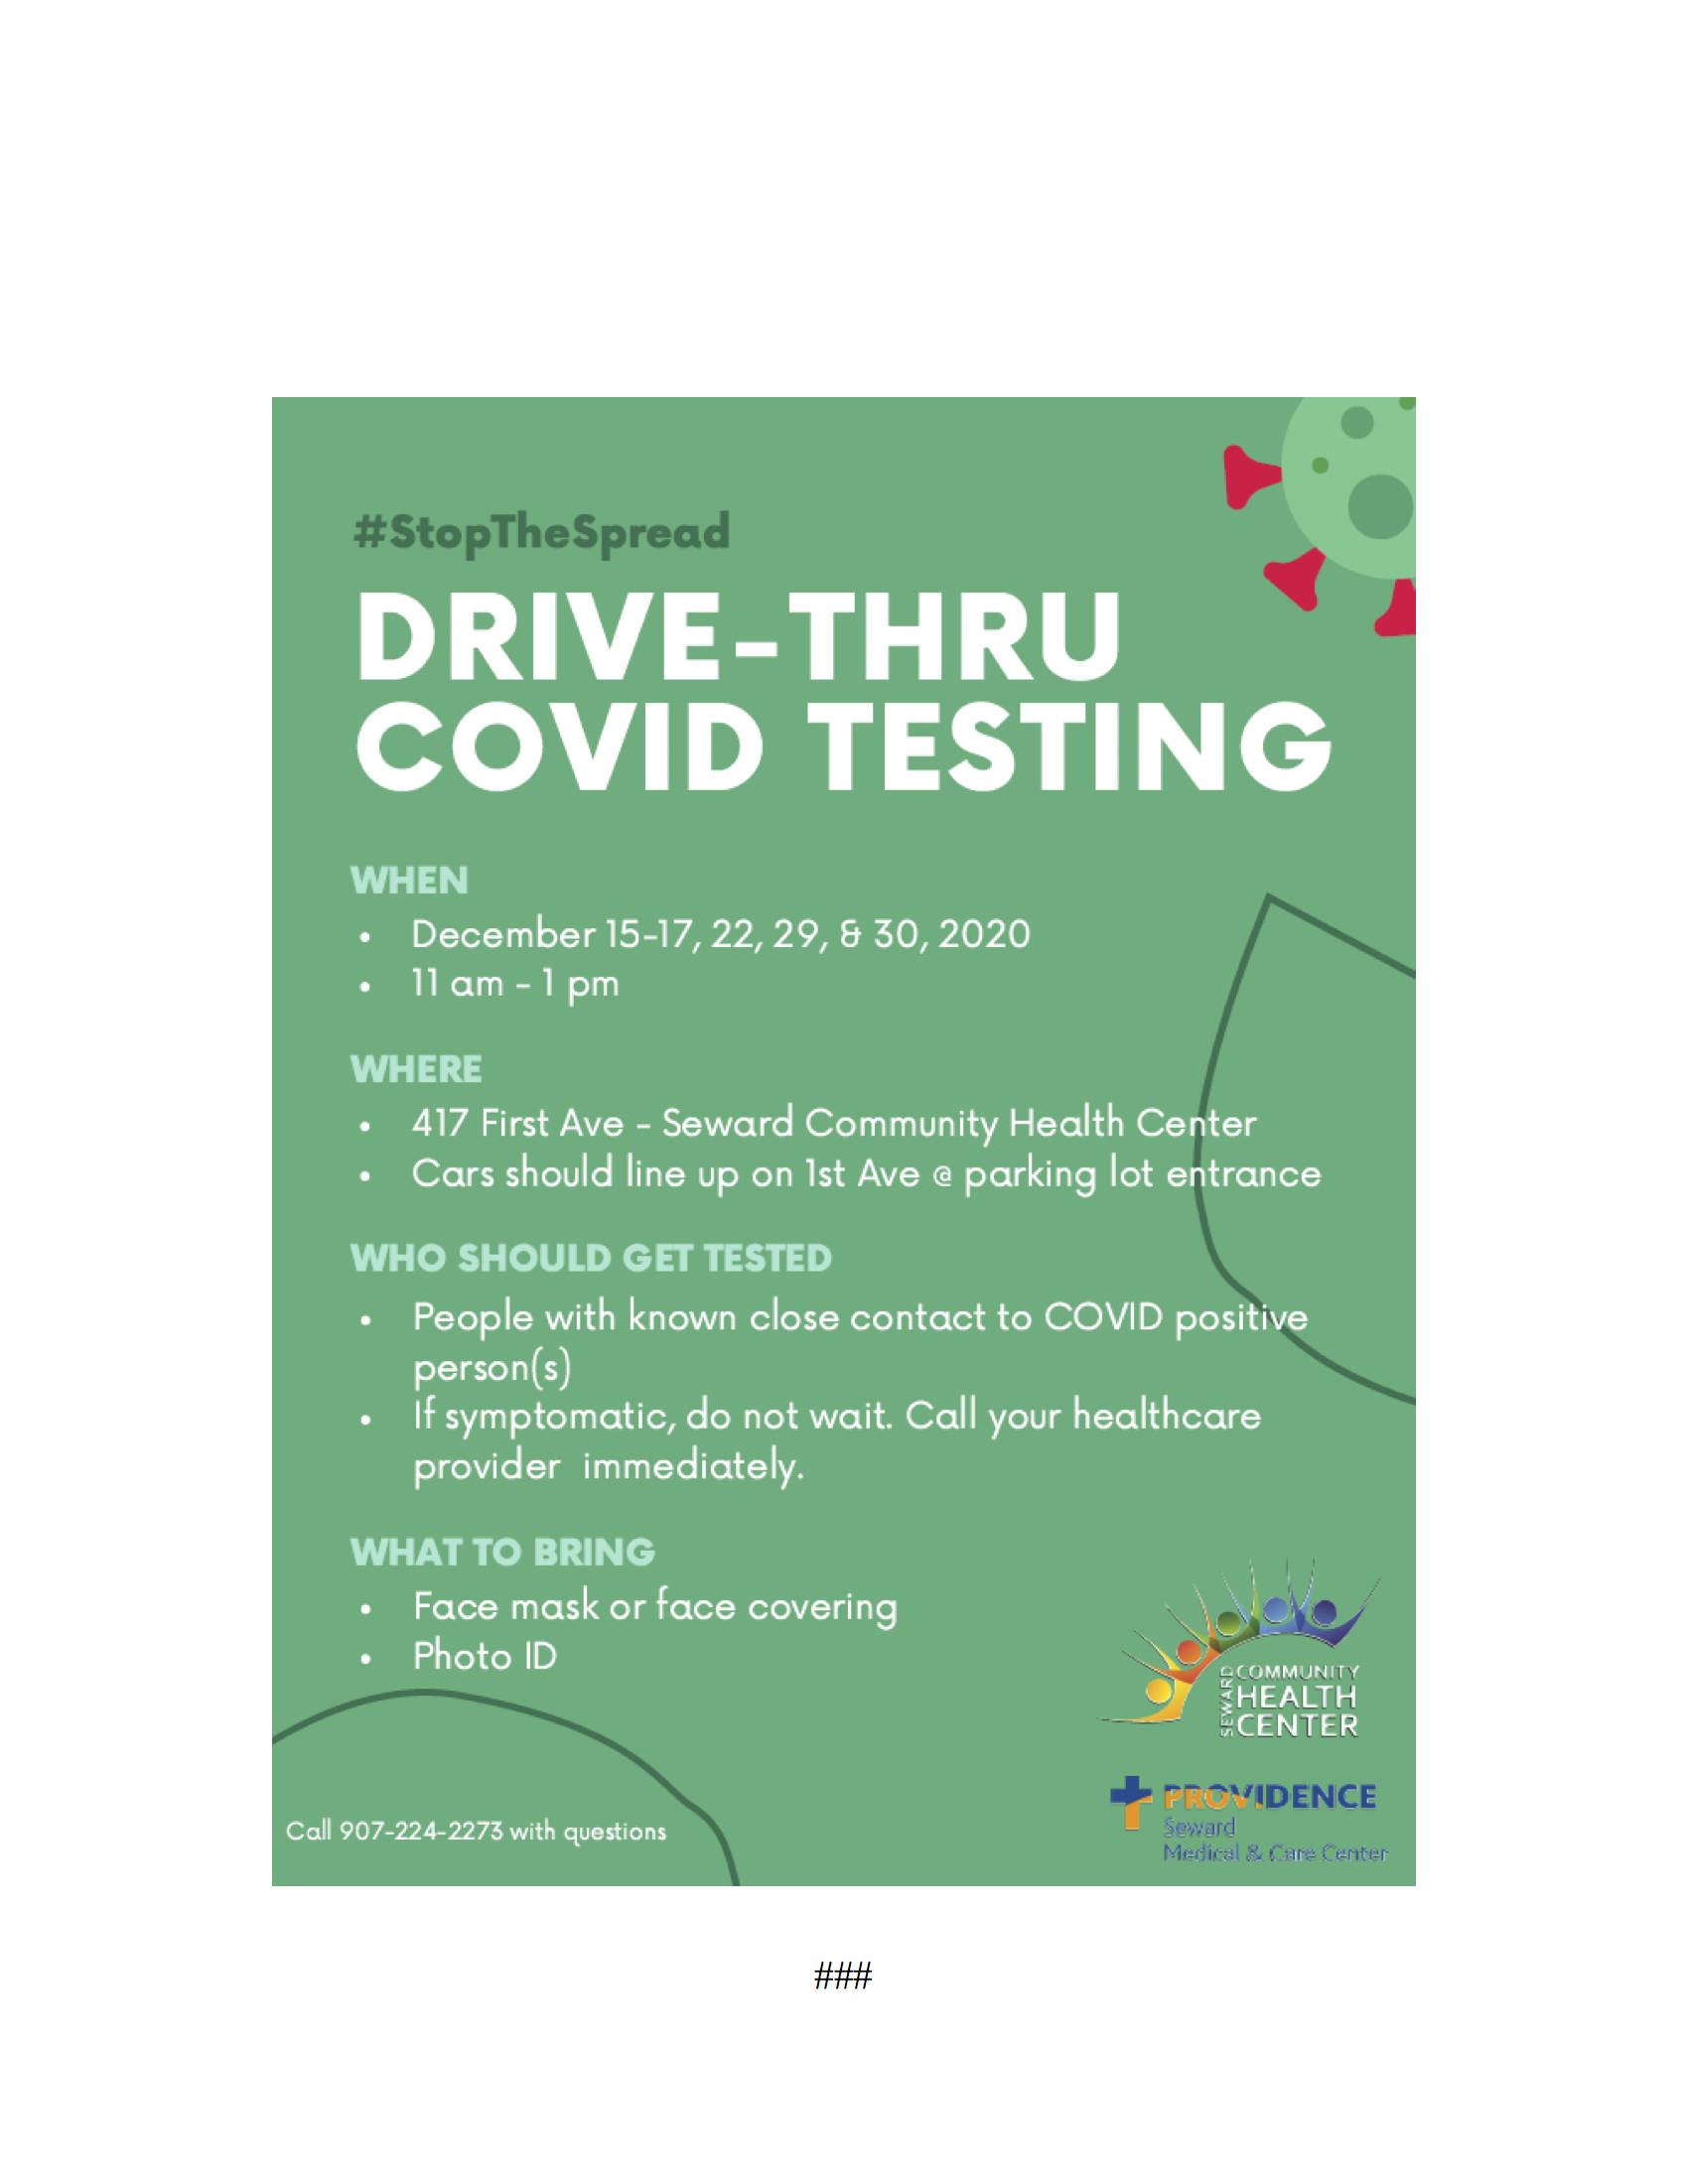 Seward Community Health Center is offering targeted drive-thru COVID-19 testing.